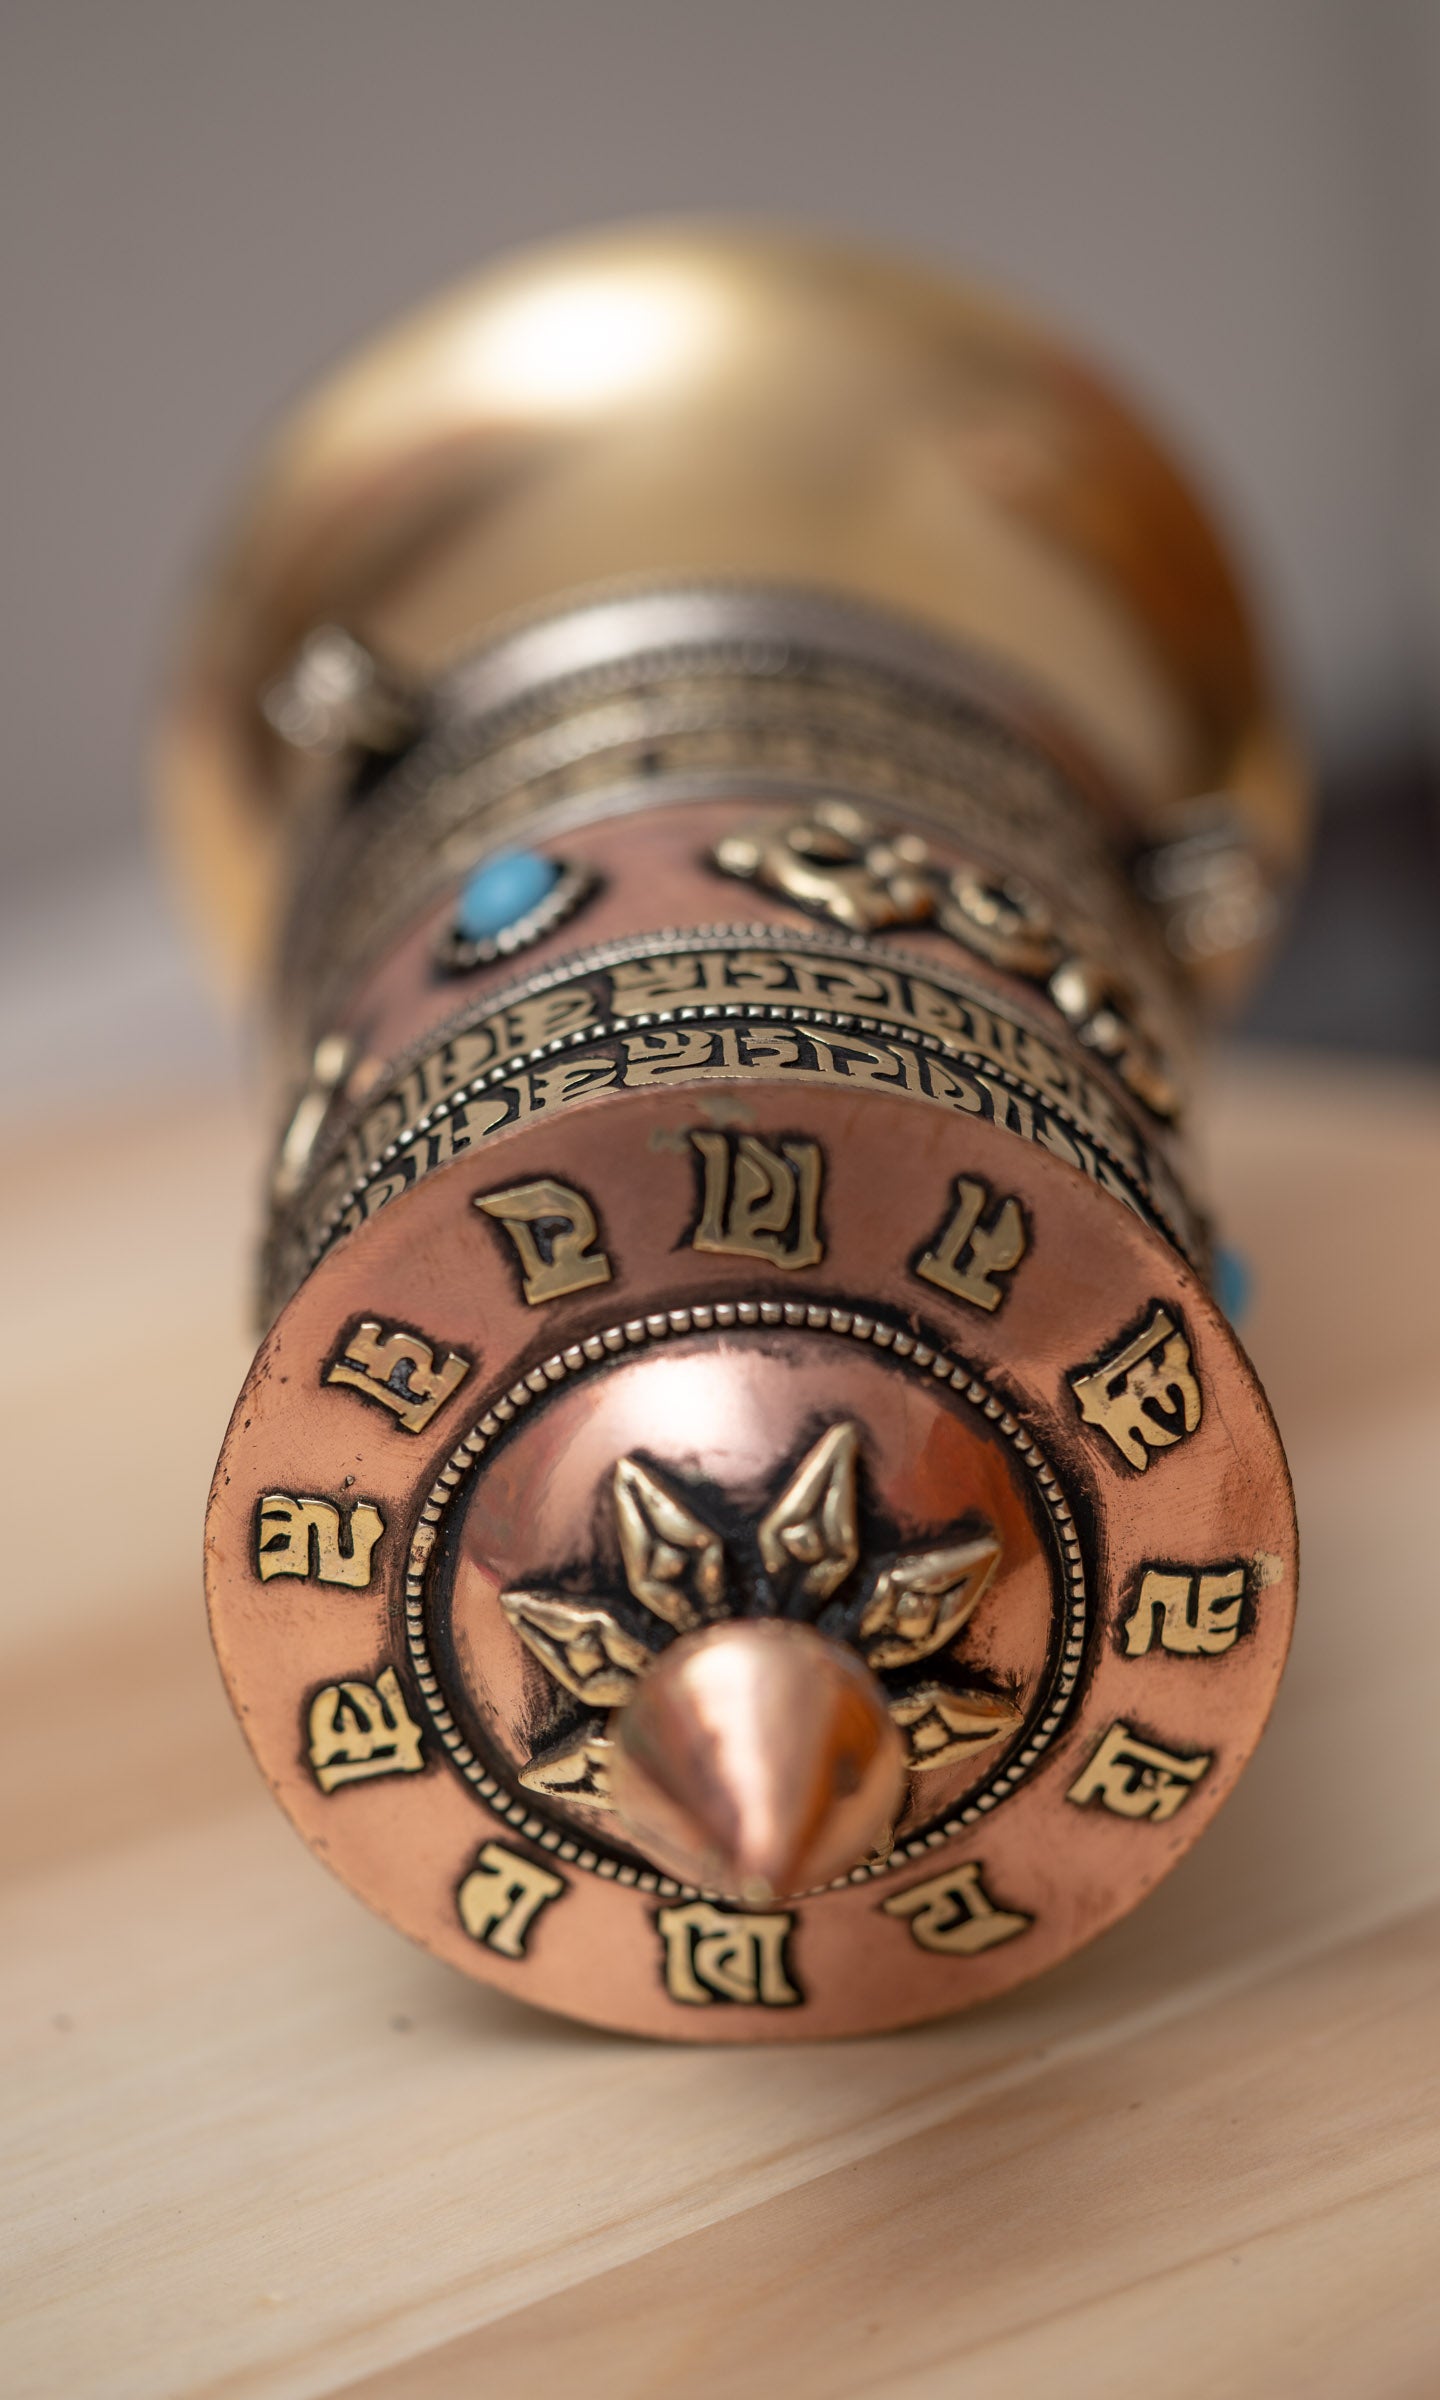  Spinning the Bajra prayer wheel purifies negative karma, obscurations, and defilements.